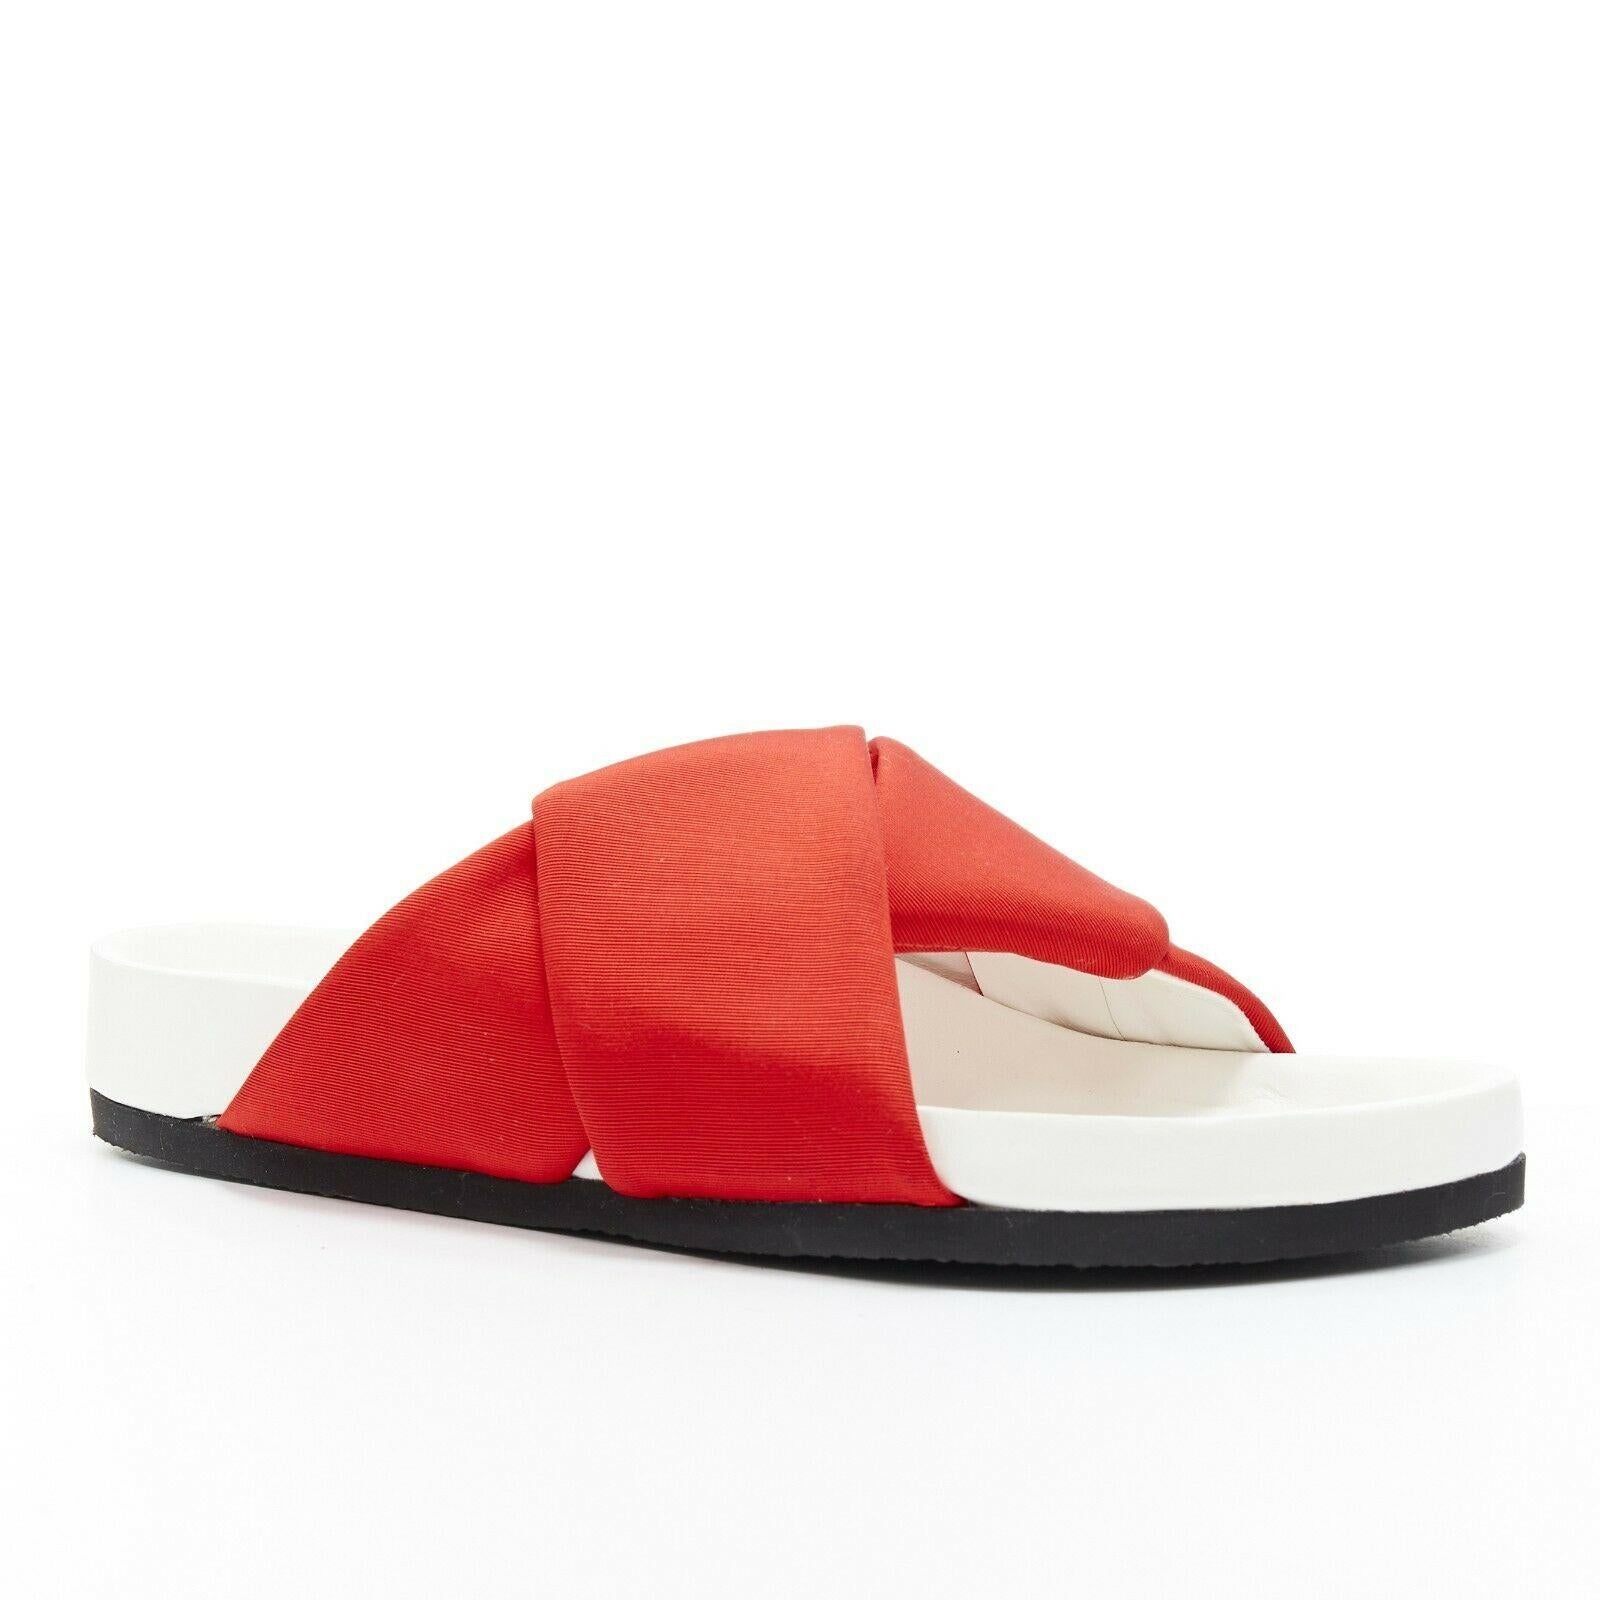 new CELINE PHOEBE PHILO Twist red grosgrain strap white sole slide sandals EU37

CELINE BY PHOEBE PHILO
Boxy slides. Red grosgrain origami twisted strap upper. 
White leather sole. Black rubber sole. Moulded footbed. 
Made in Italy.

SIZING
Designer